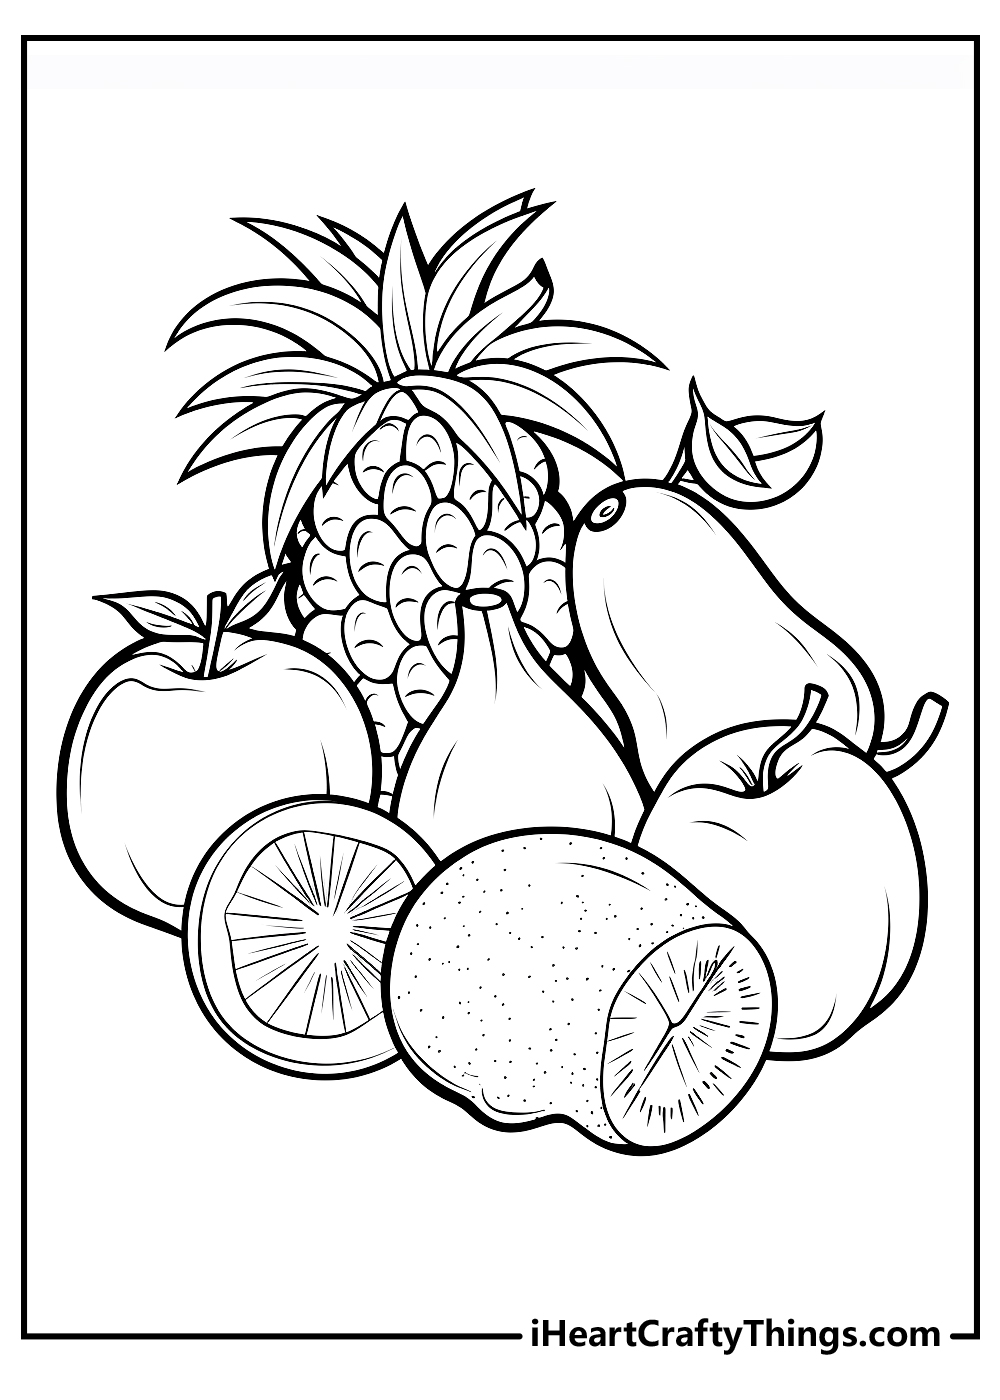 FREE! - Fruits Colouring Sheet For Children | Colouring Sheets